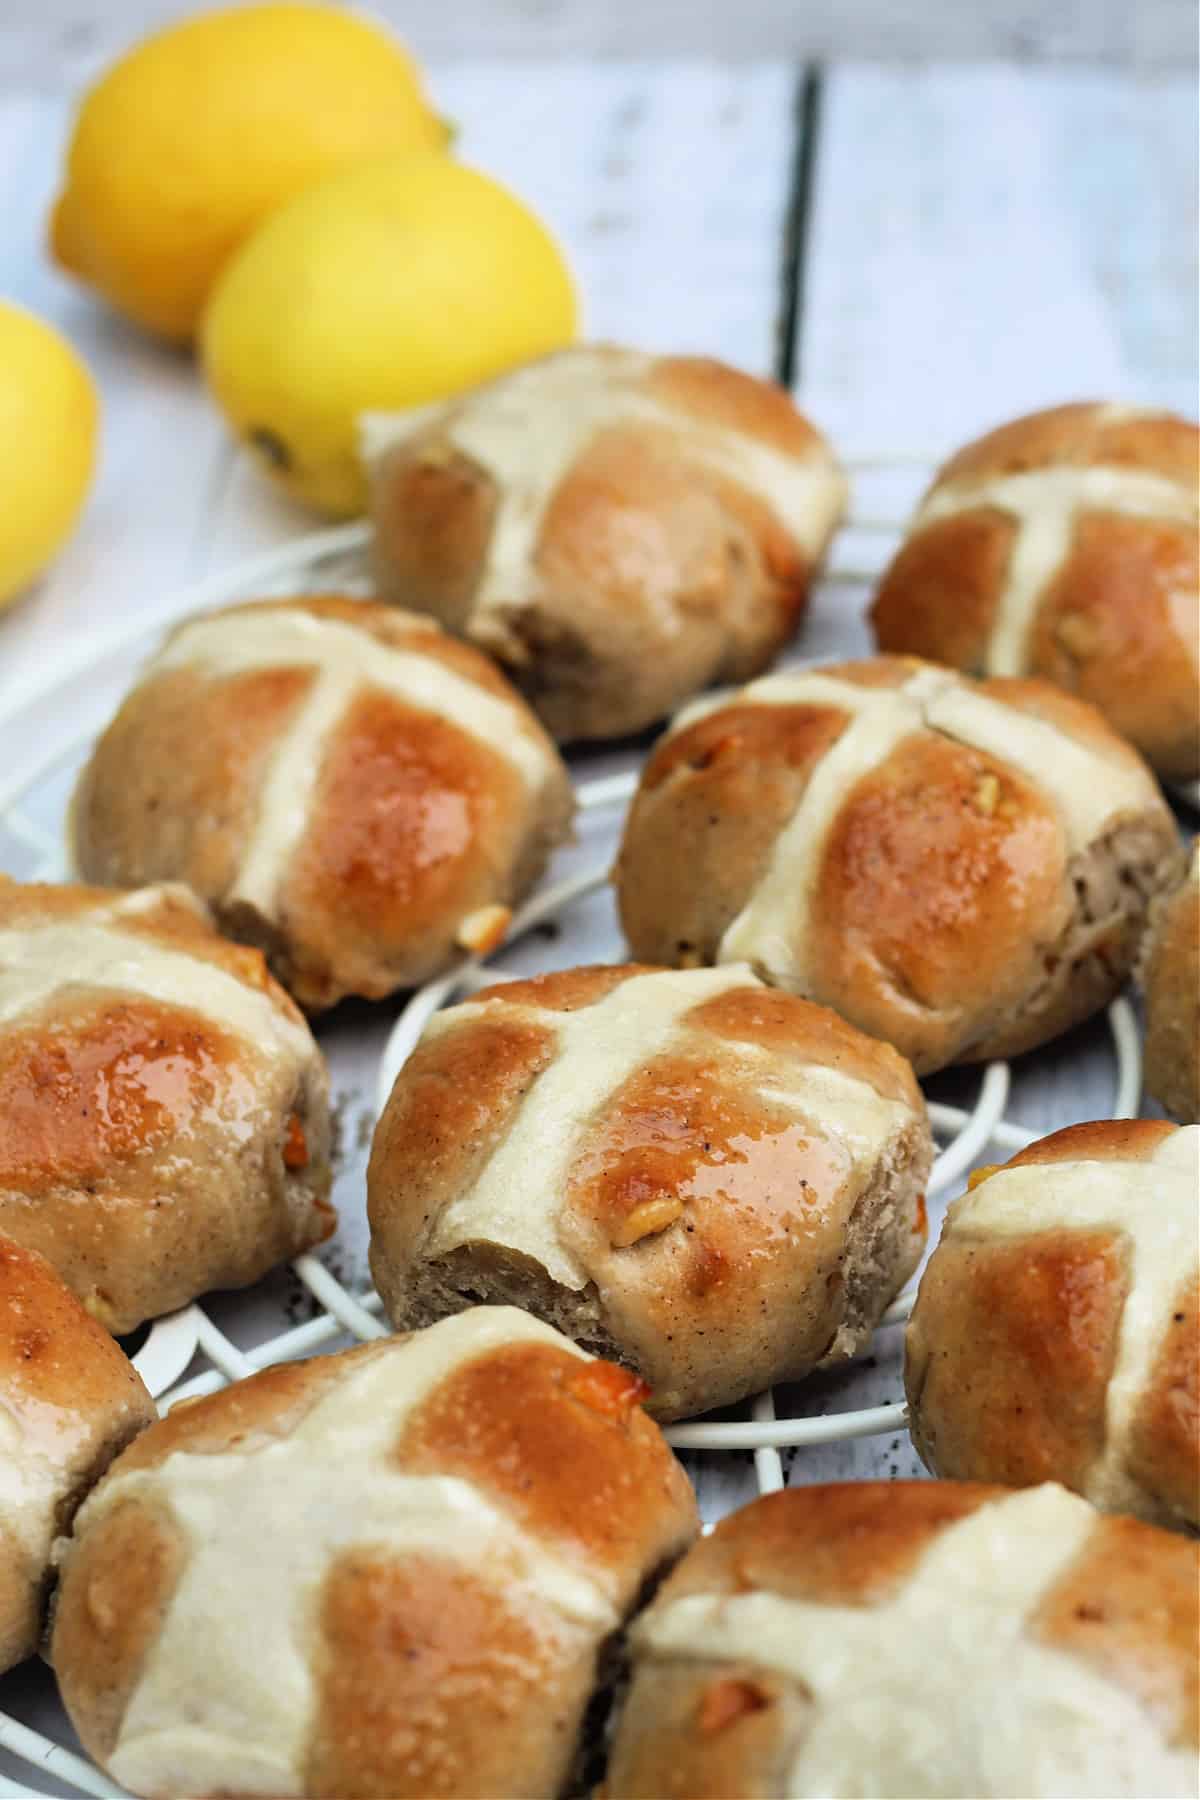 Hot cross buns on a cooling rack with lemons in background.